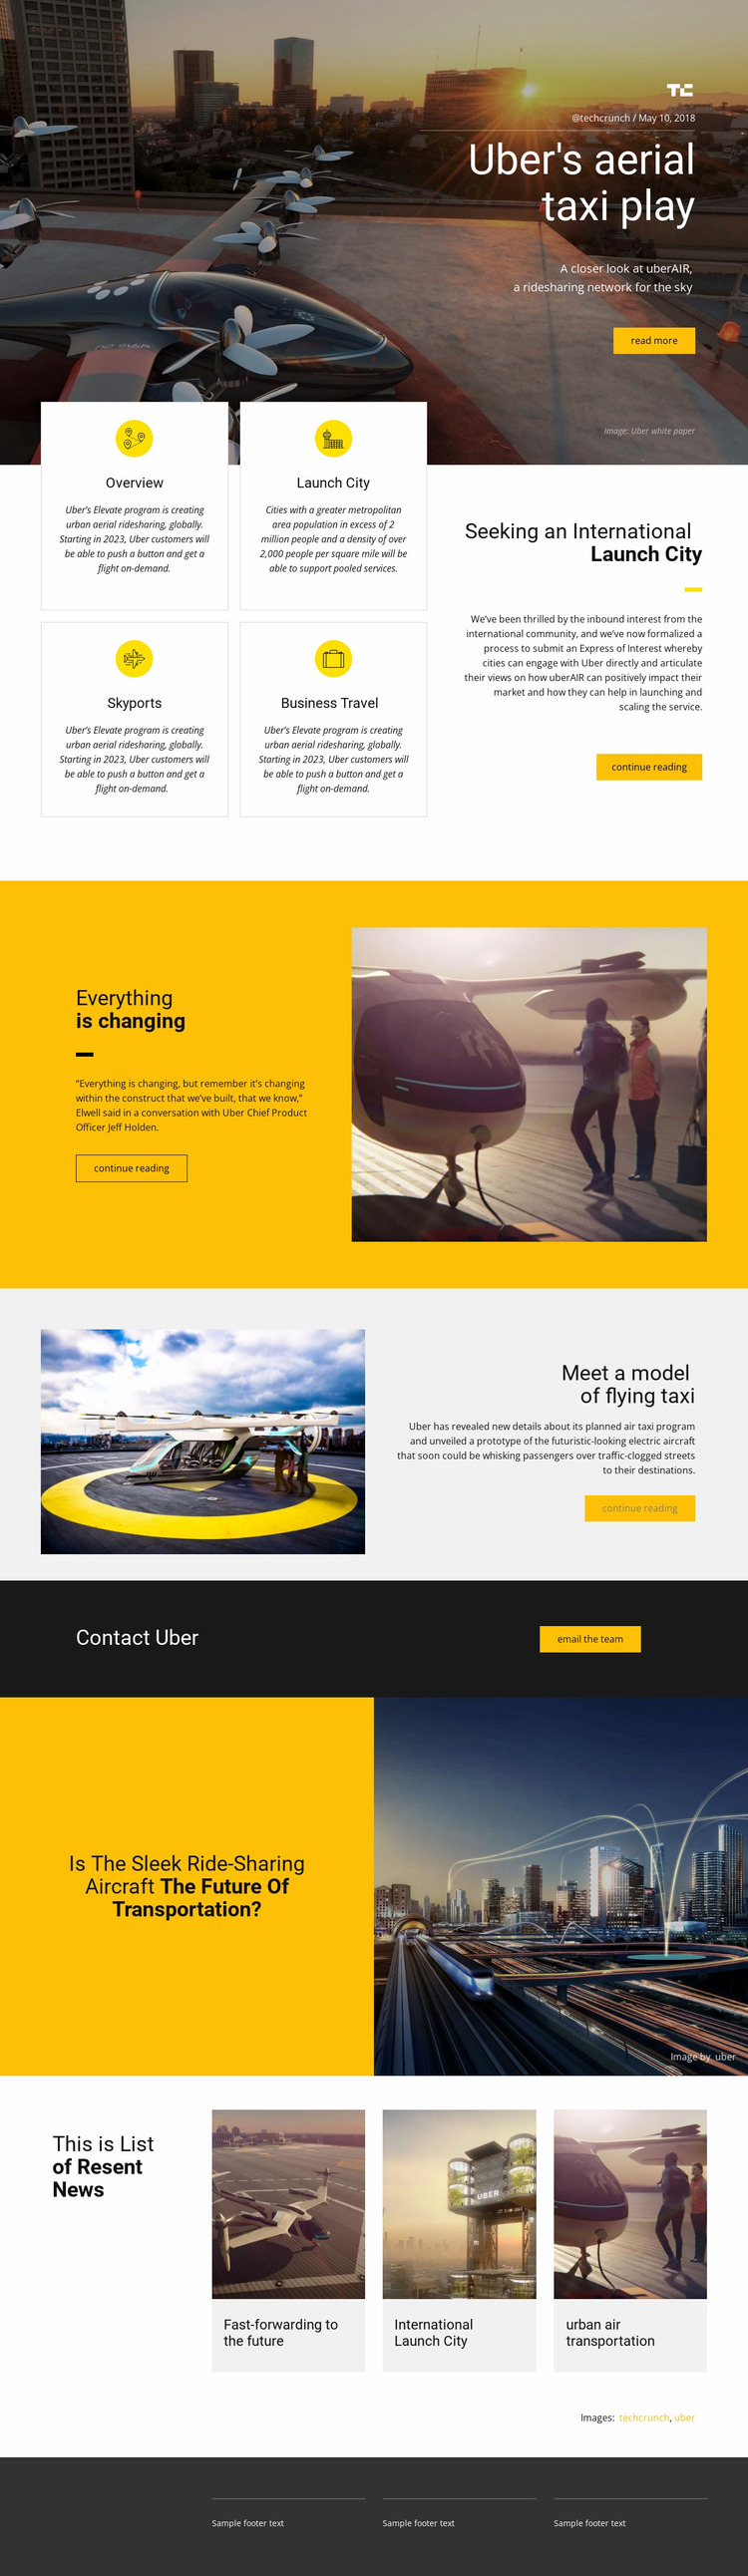 Uber's Aerial Taxi Play Website Mockup